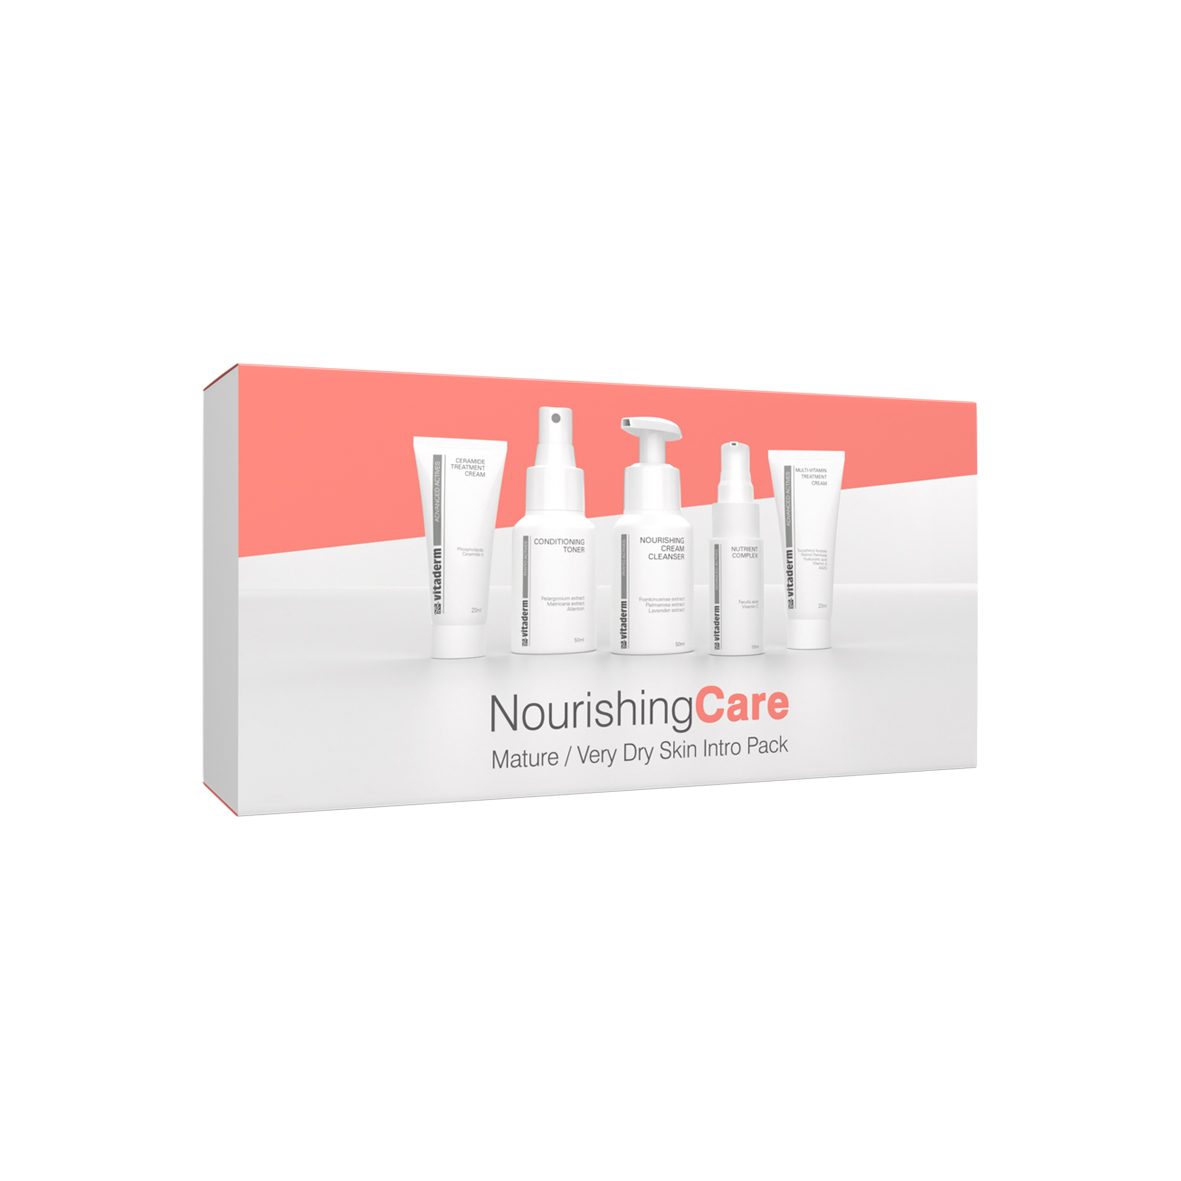 introductory-packs-nourishing-care